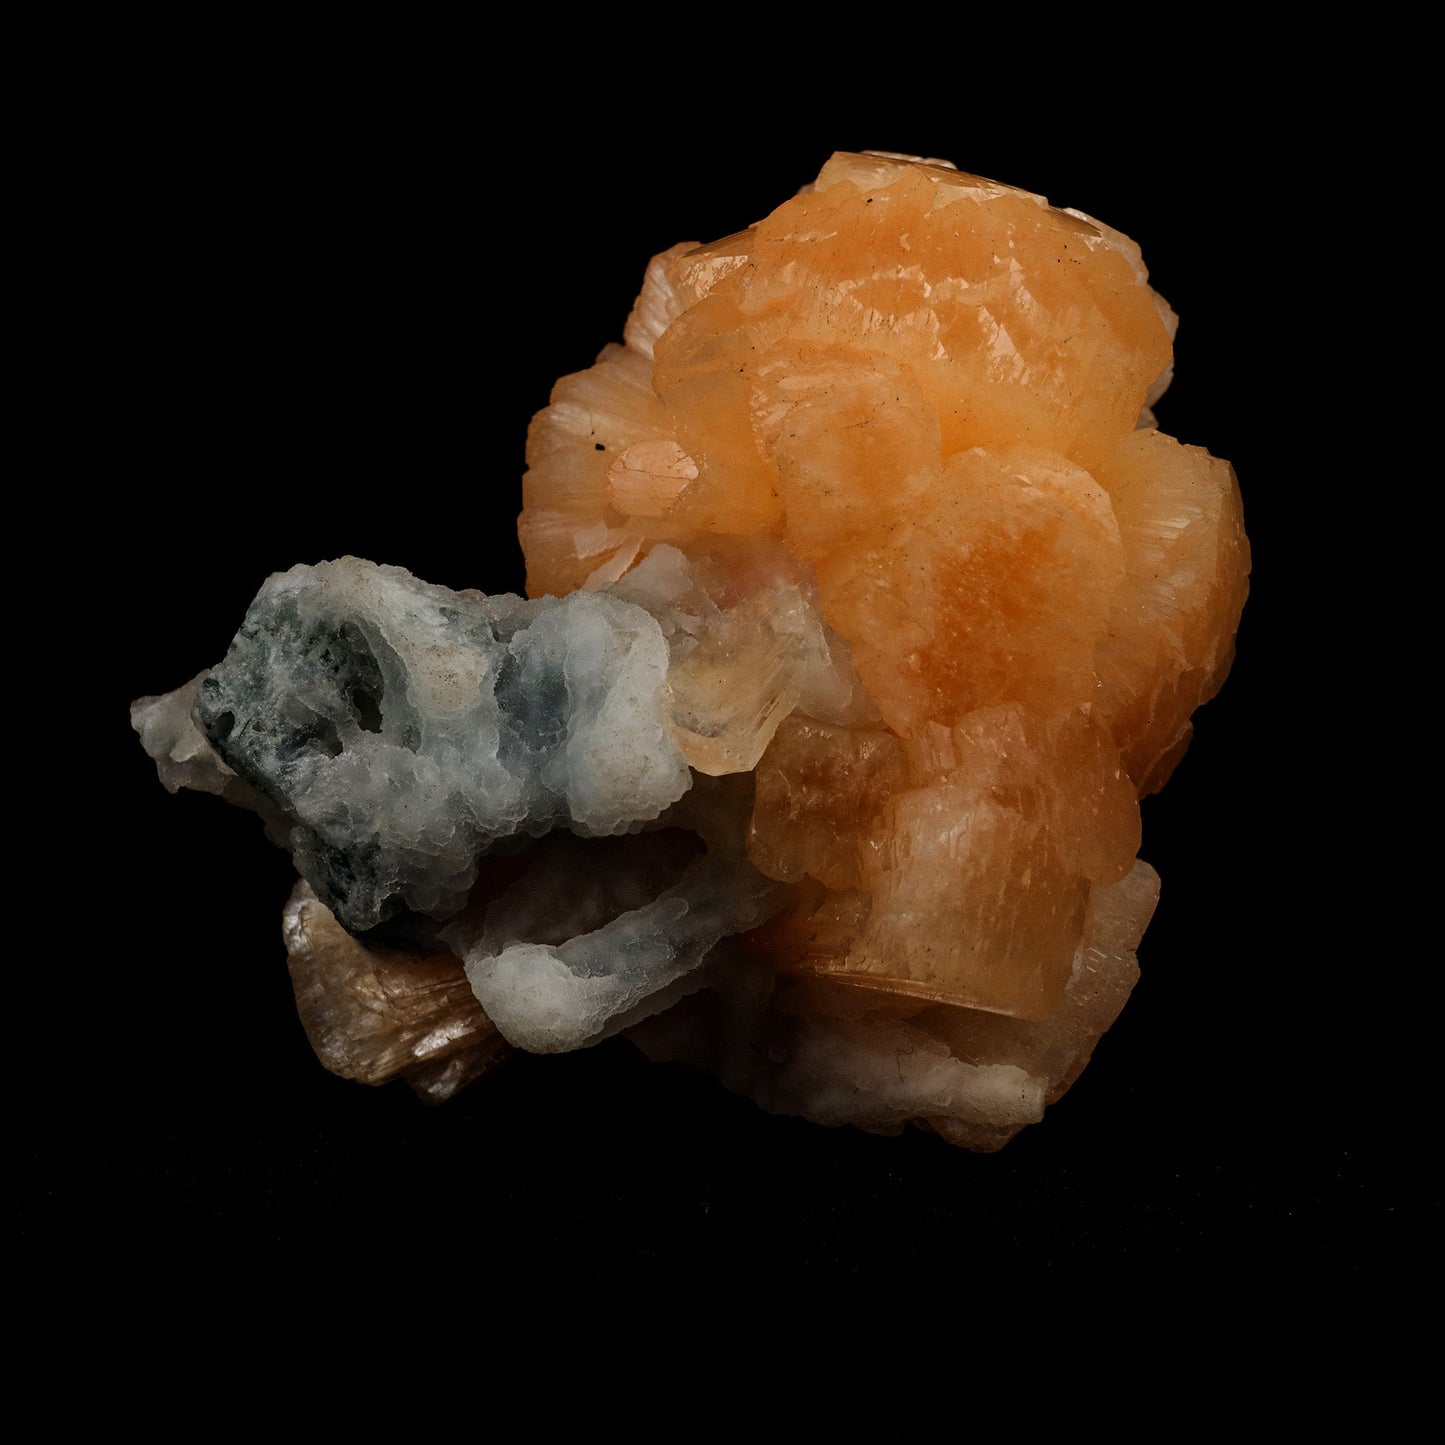 Stellerilite on Chalcedony Rare Find Natural Mineral Specimen # B 511…  https://www.superbminerals.us/products/stellerilite-on-chalcedony-rare-find-natural-mineral-specimen-b-5119  Features: A large,partial radial "ball" of soft orange colored Stellerite is composed of hundreds of thin, tightly intergrown orthorhombic blades sits beautifully on the contrasting black basalt matrix. The piece itself is in excellent condition with no major damage to be seen, only a few TINY imperfections